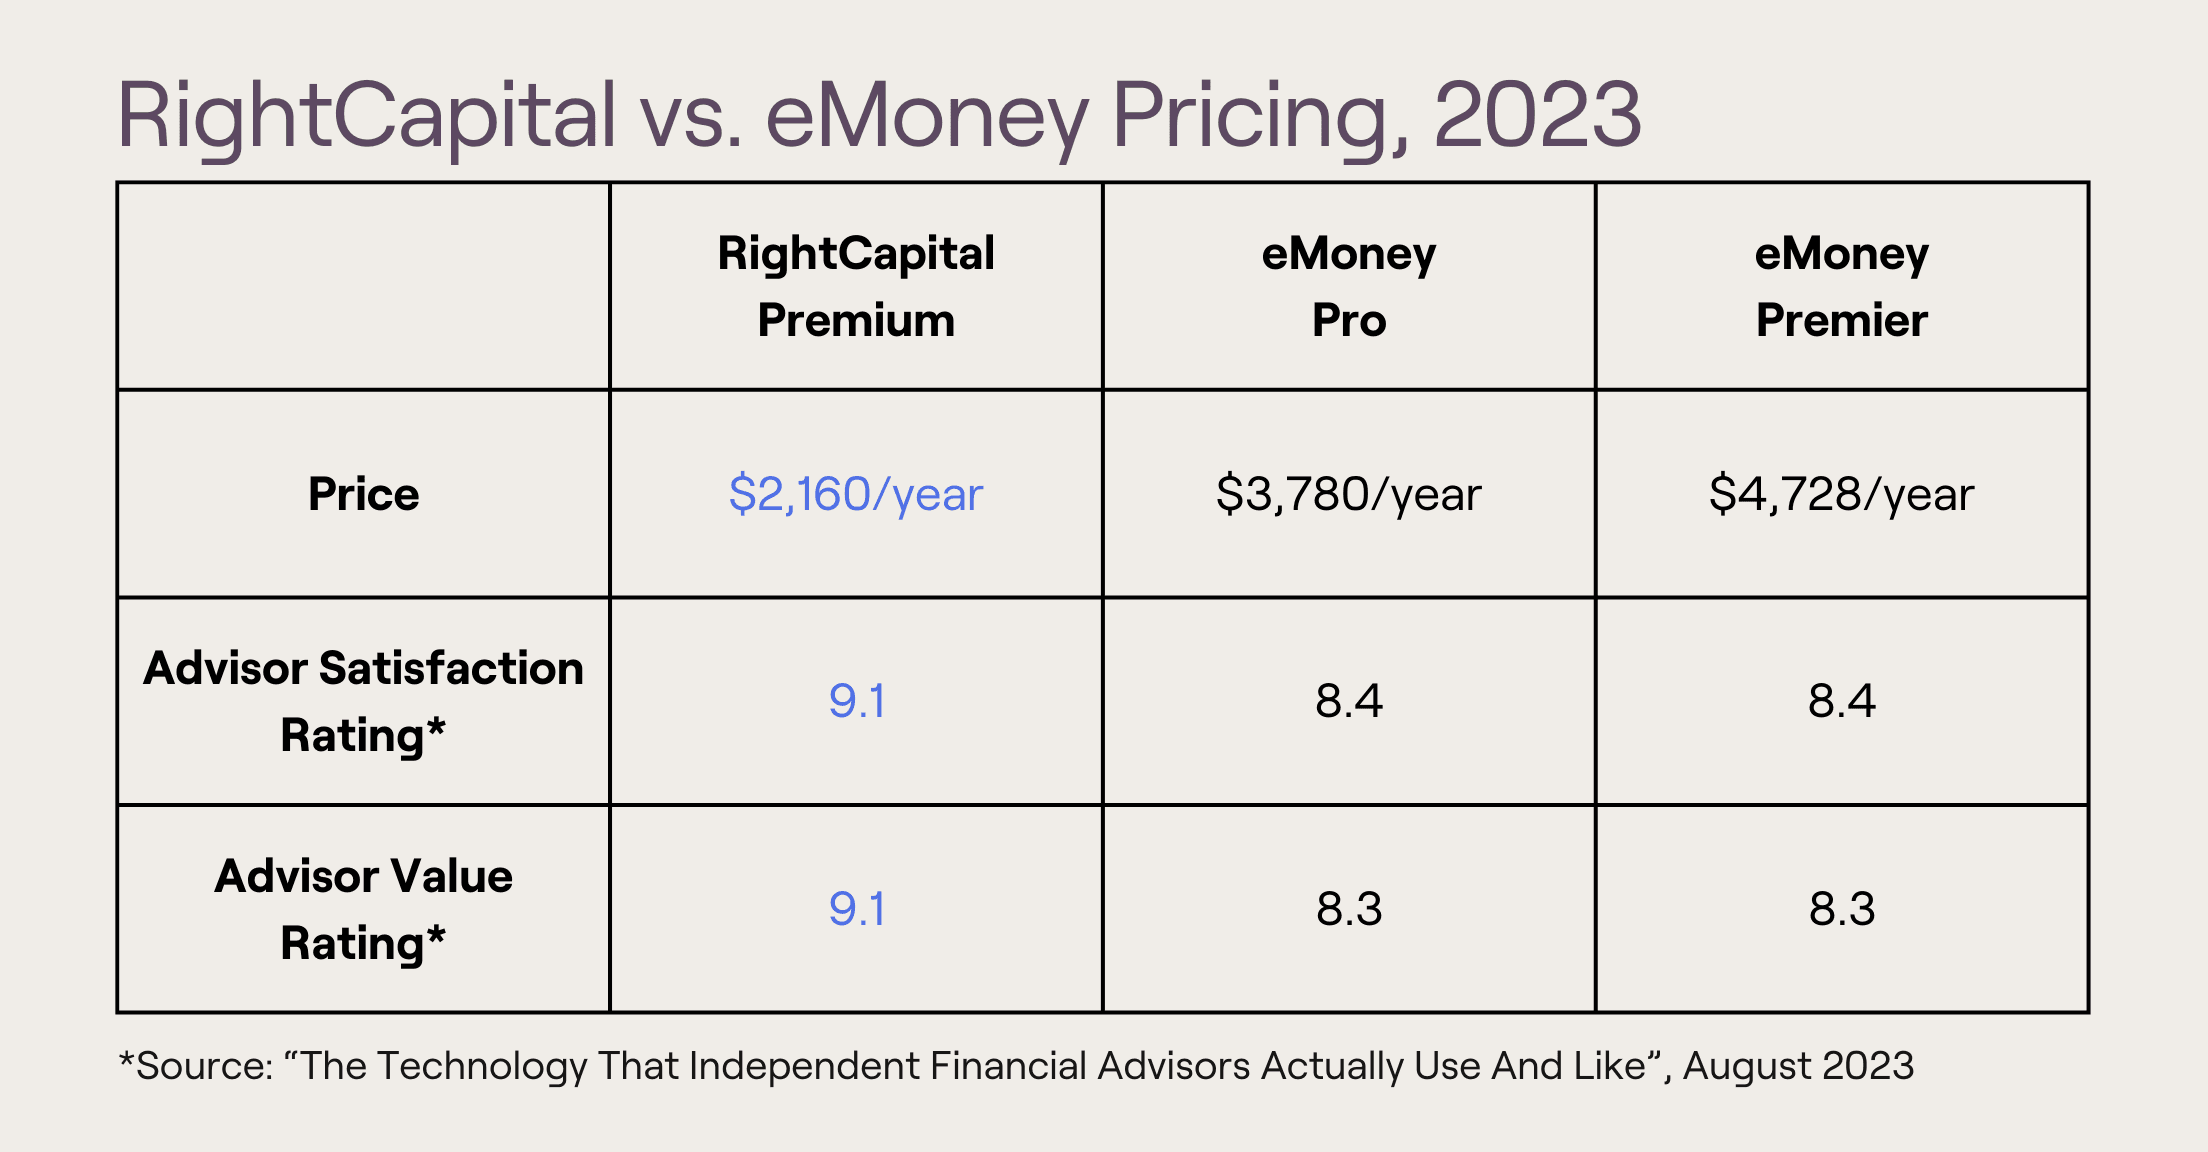 A chart showing the yearly cost of RightCapital Premium ($2160) vs. eMoney Pro ($3780) and eMoney Premier ($4728). Also shown is the 9.1 advisor satisfaction rating and advisor value rating of RightCapital, higher than those of eMoney.